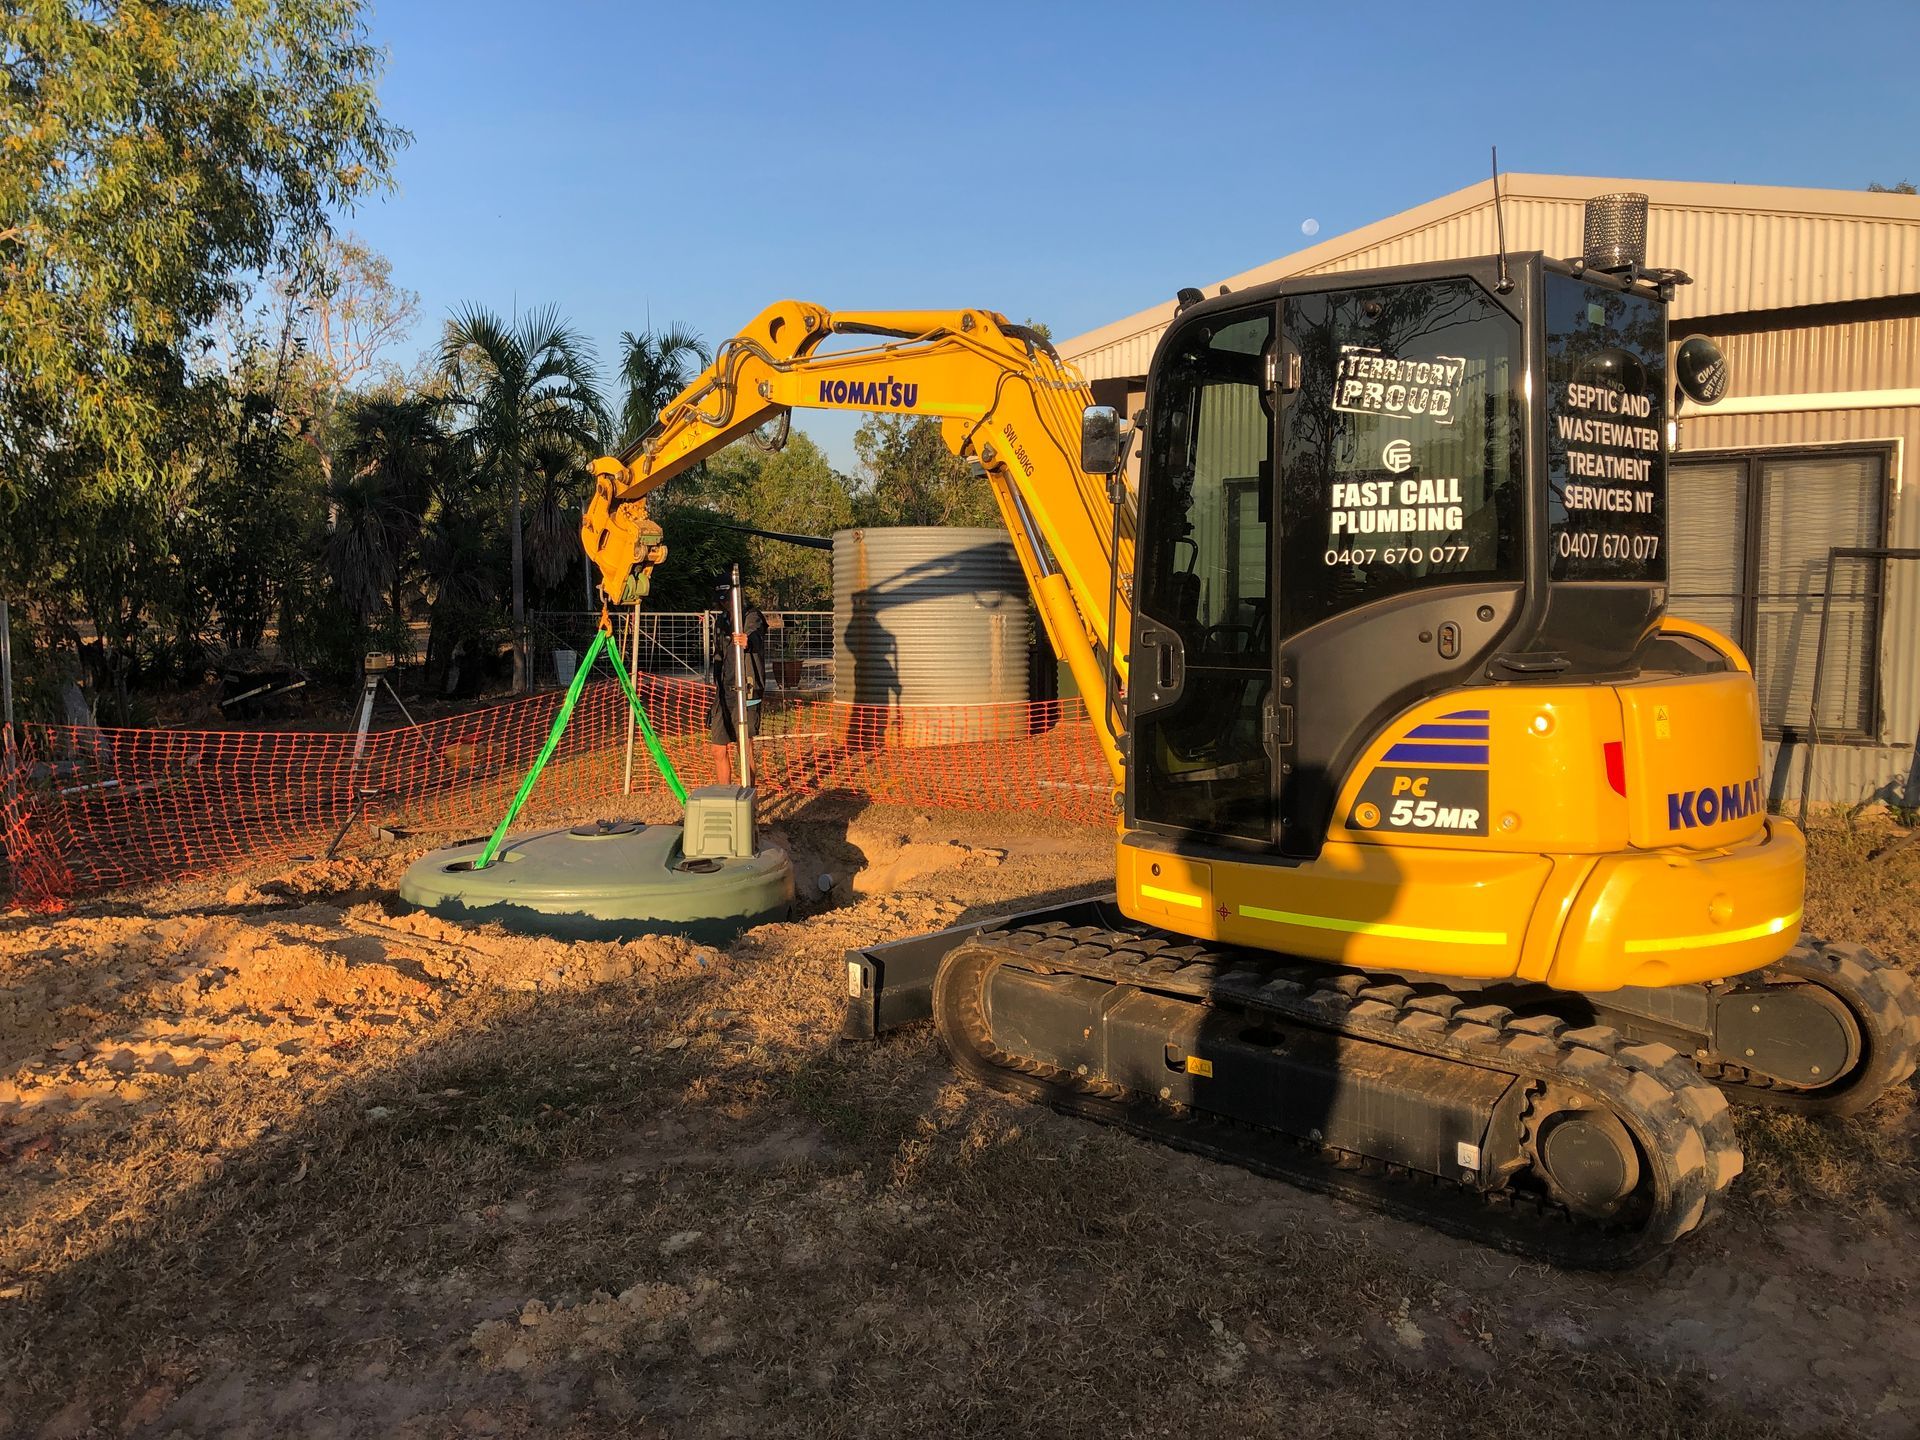 Excavator completing placing tank in - Fast Call Plumbing & Pumping